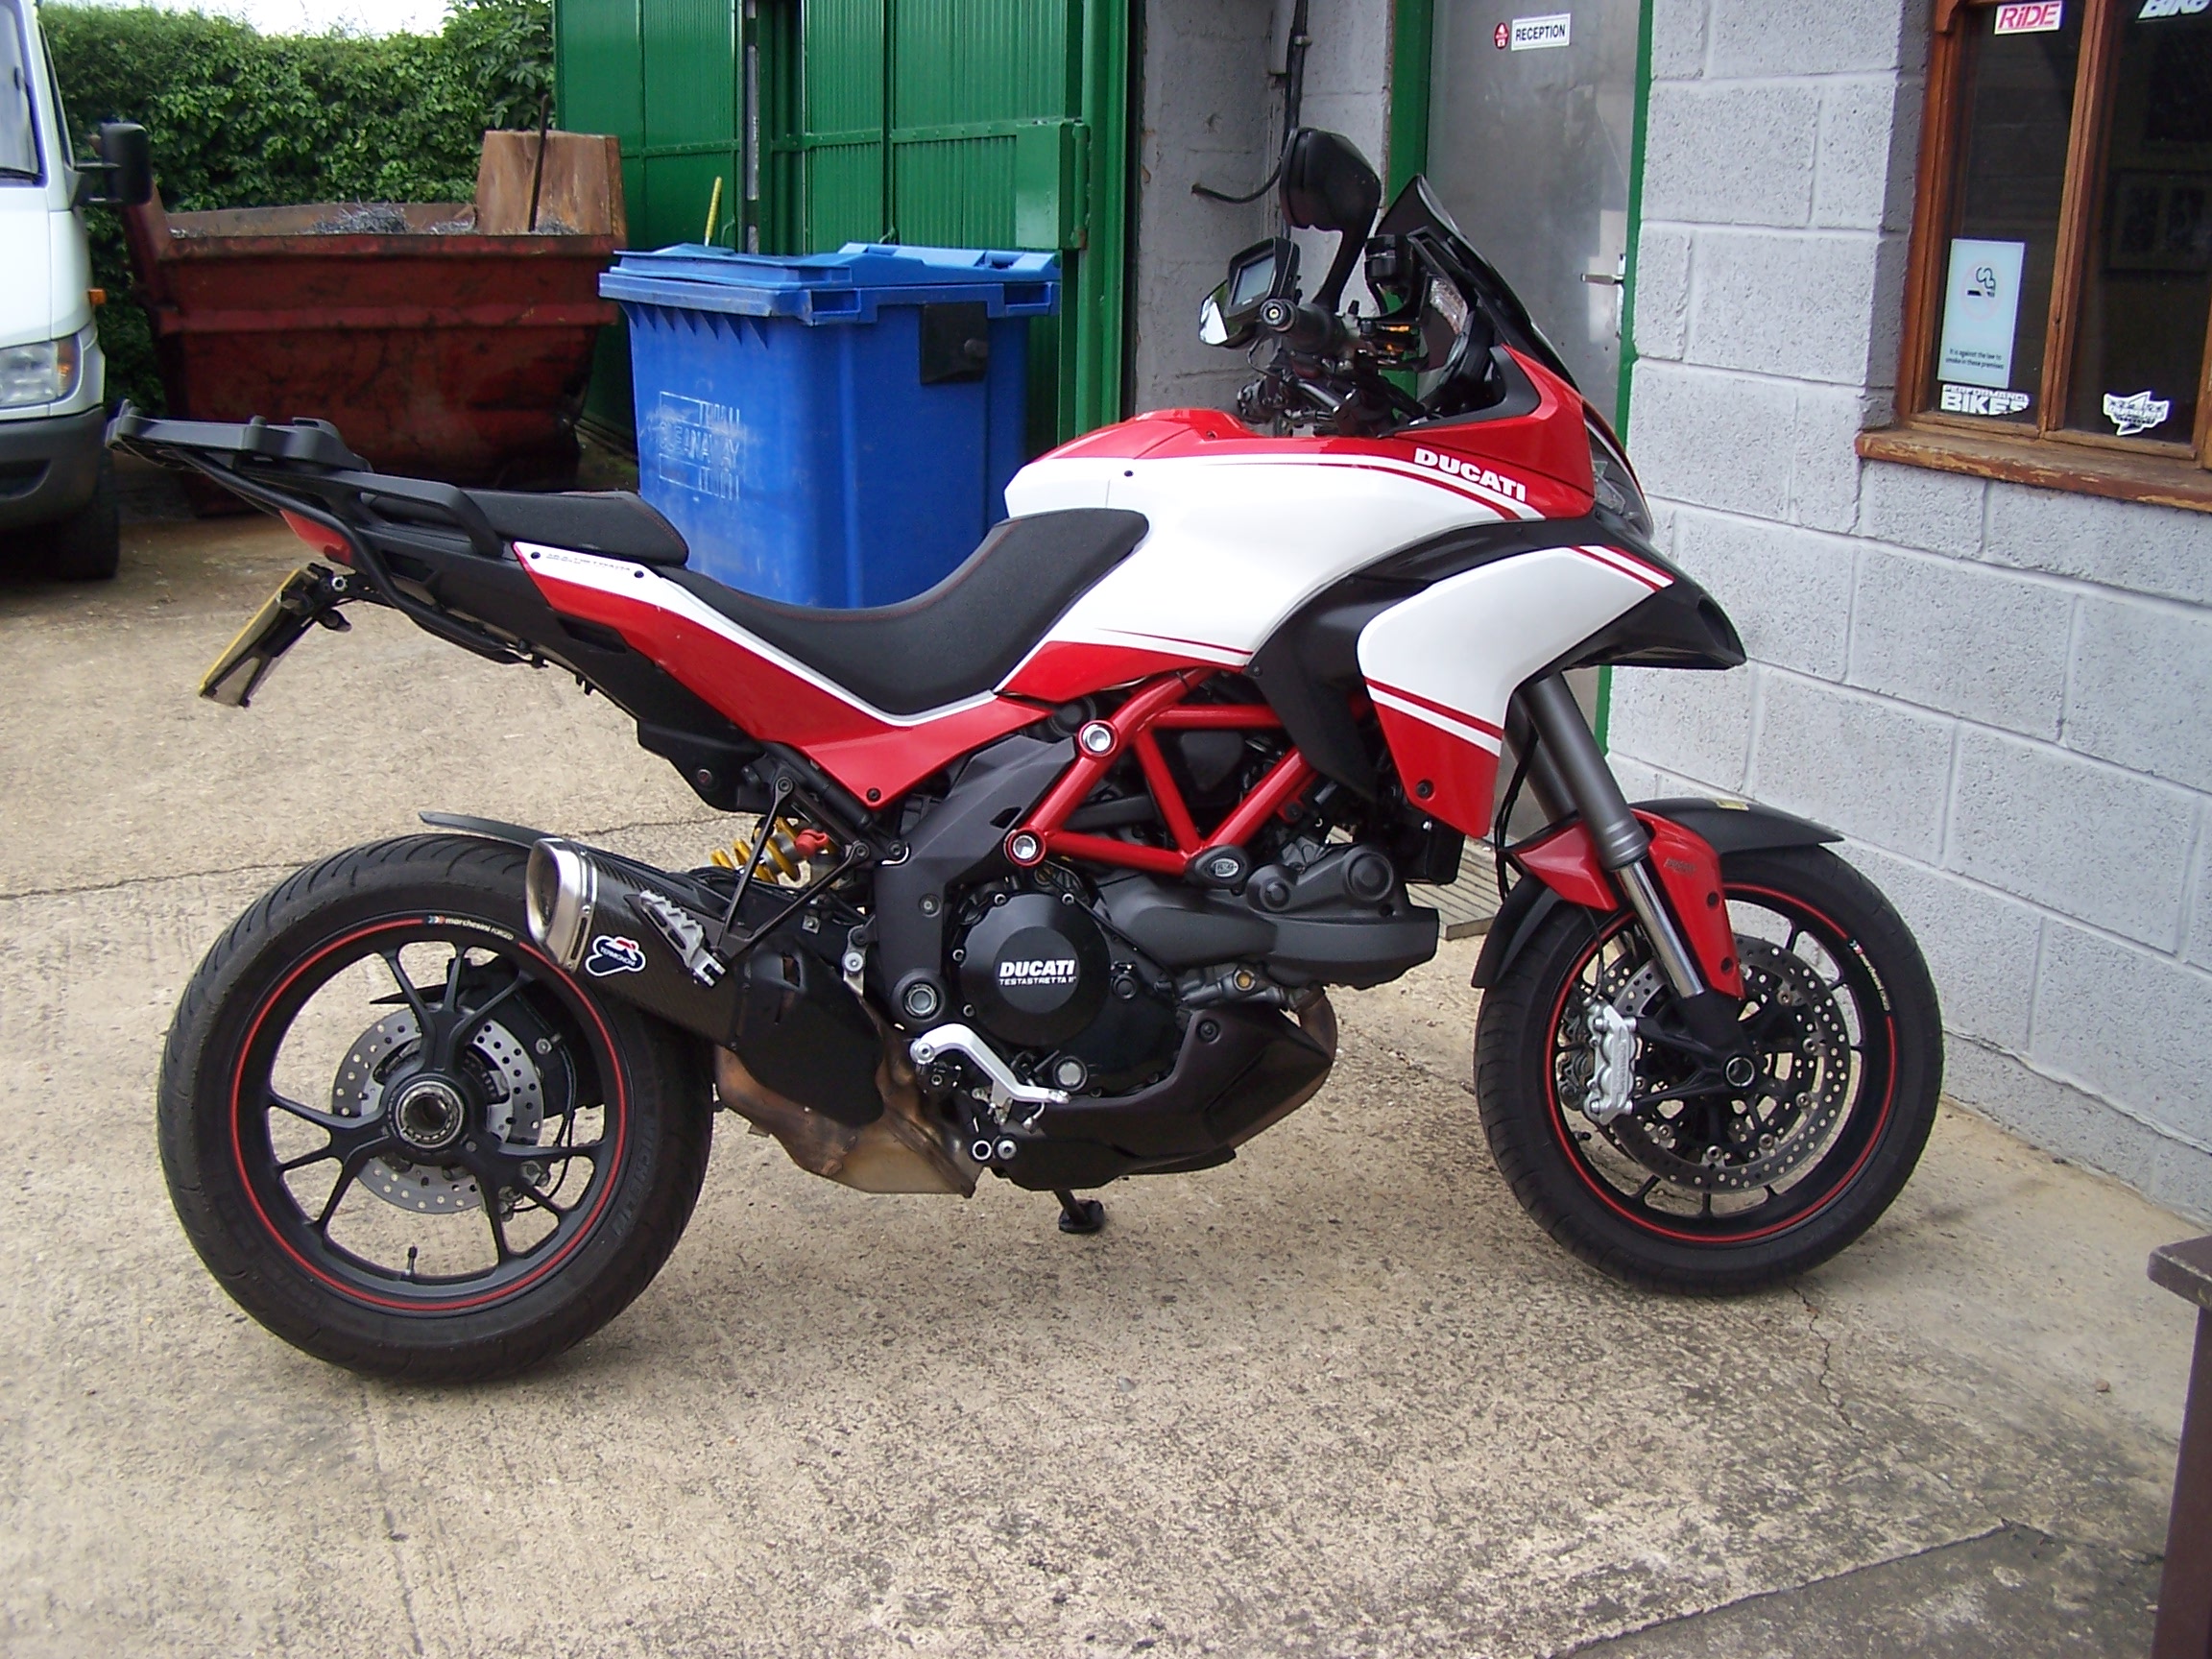 2014 Ducati Multistrada ECU remap for a smoothed out power delivery